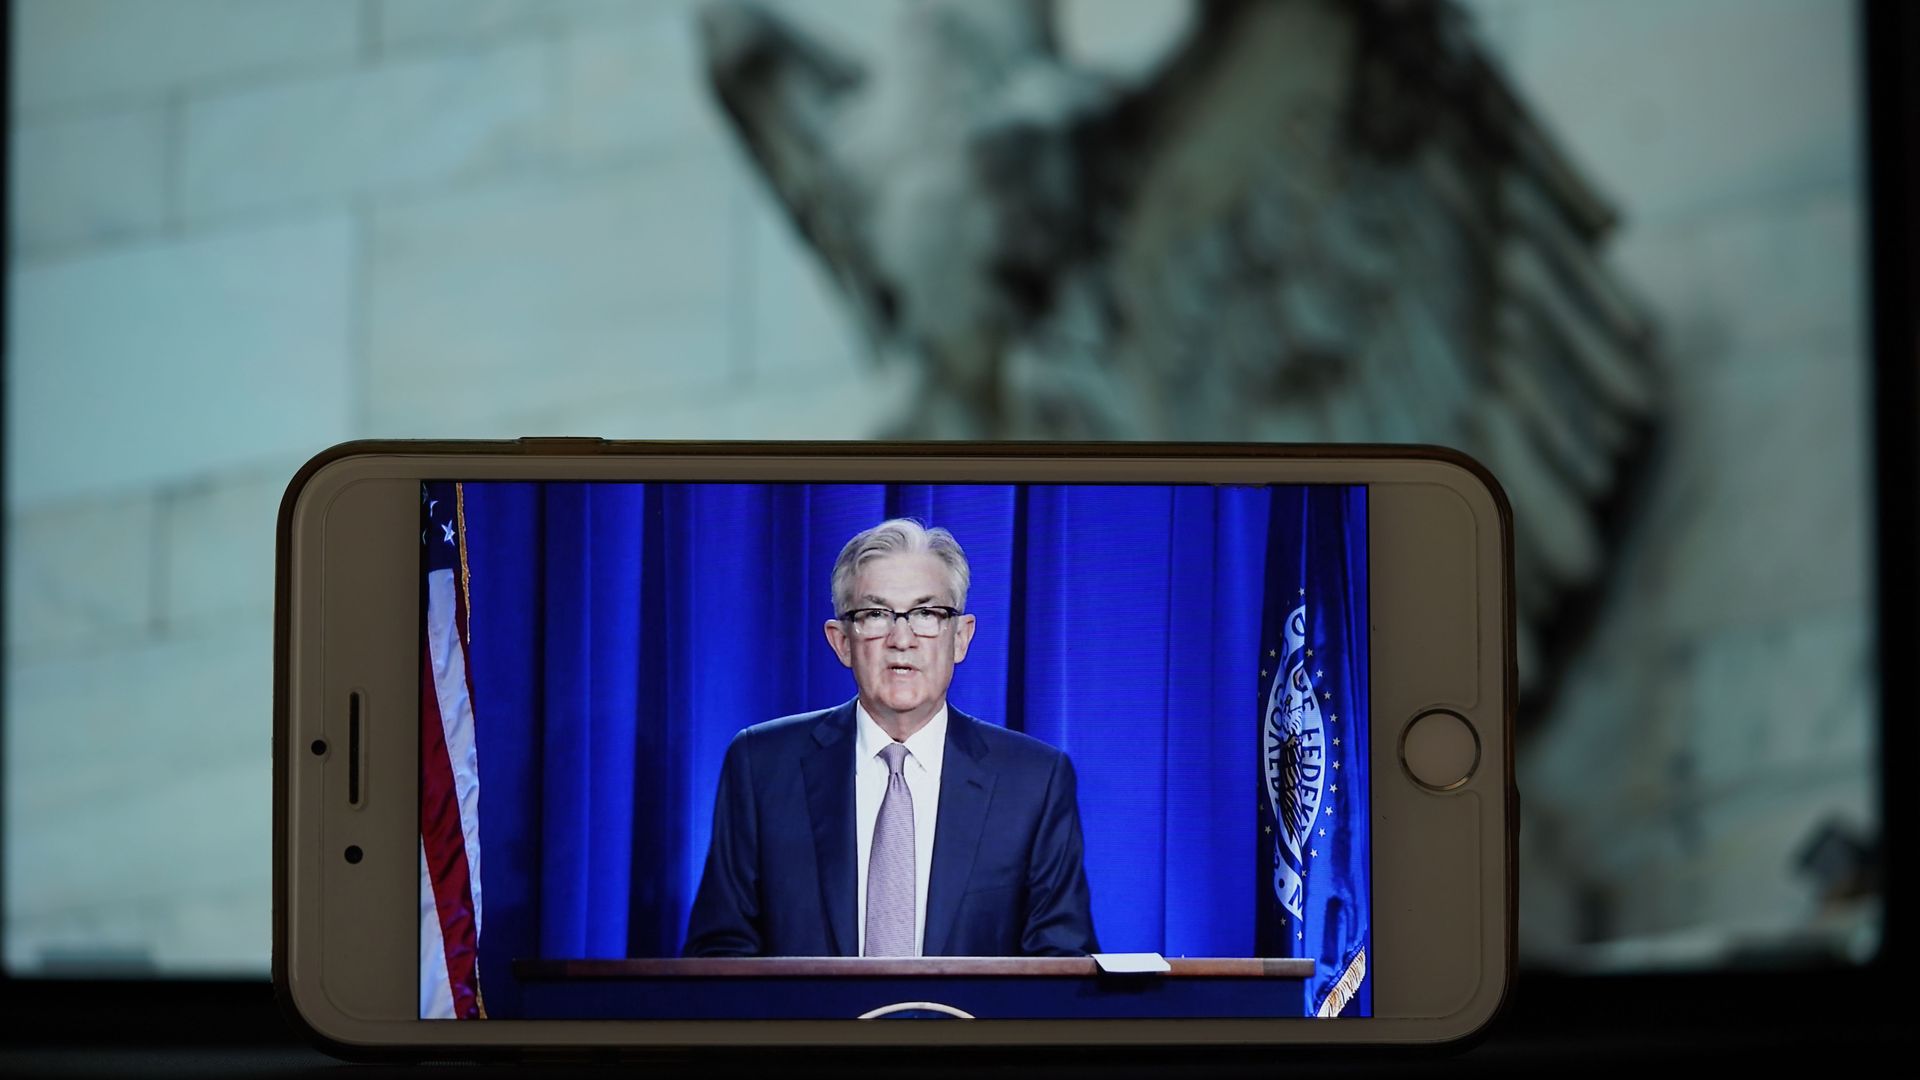  Photo taken on June 10, 2020 shows the live broadcast of U.S. Federal Reserve Chairman Jerome Powell's address during a press conference in Washington D.C., the United States.